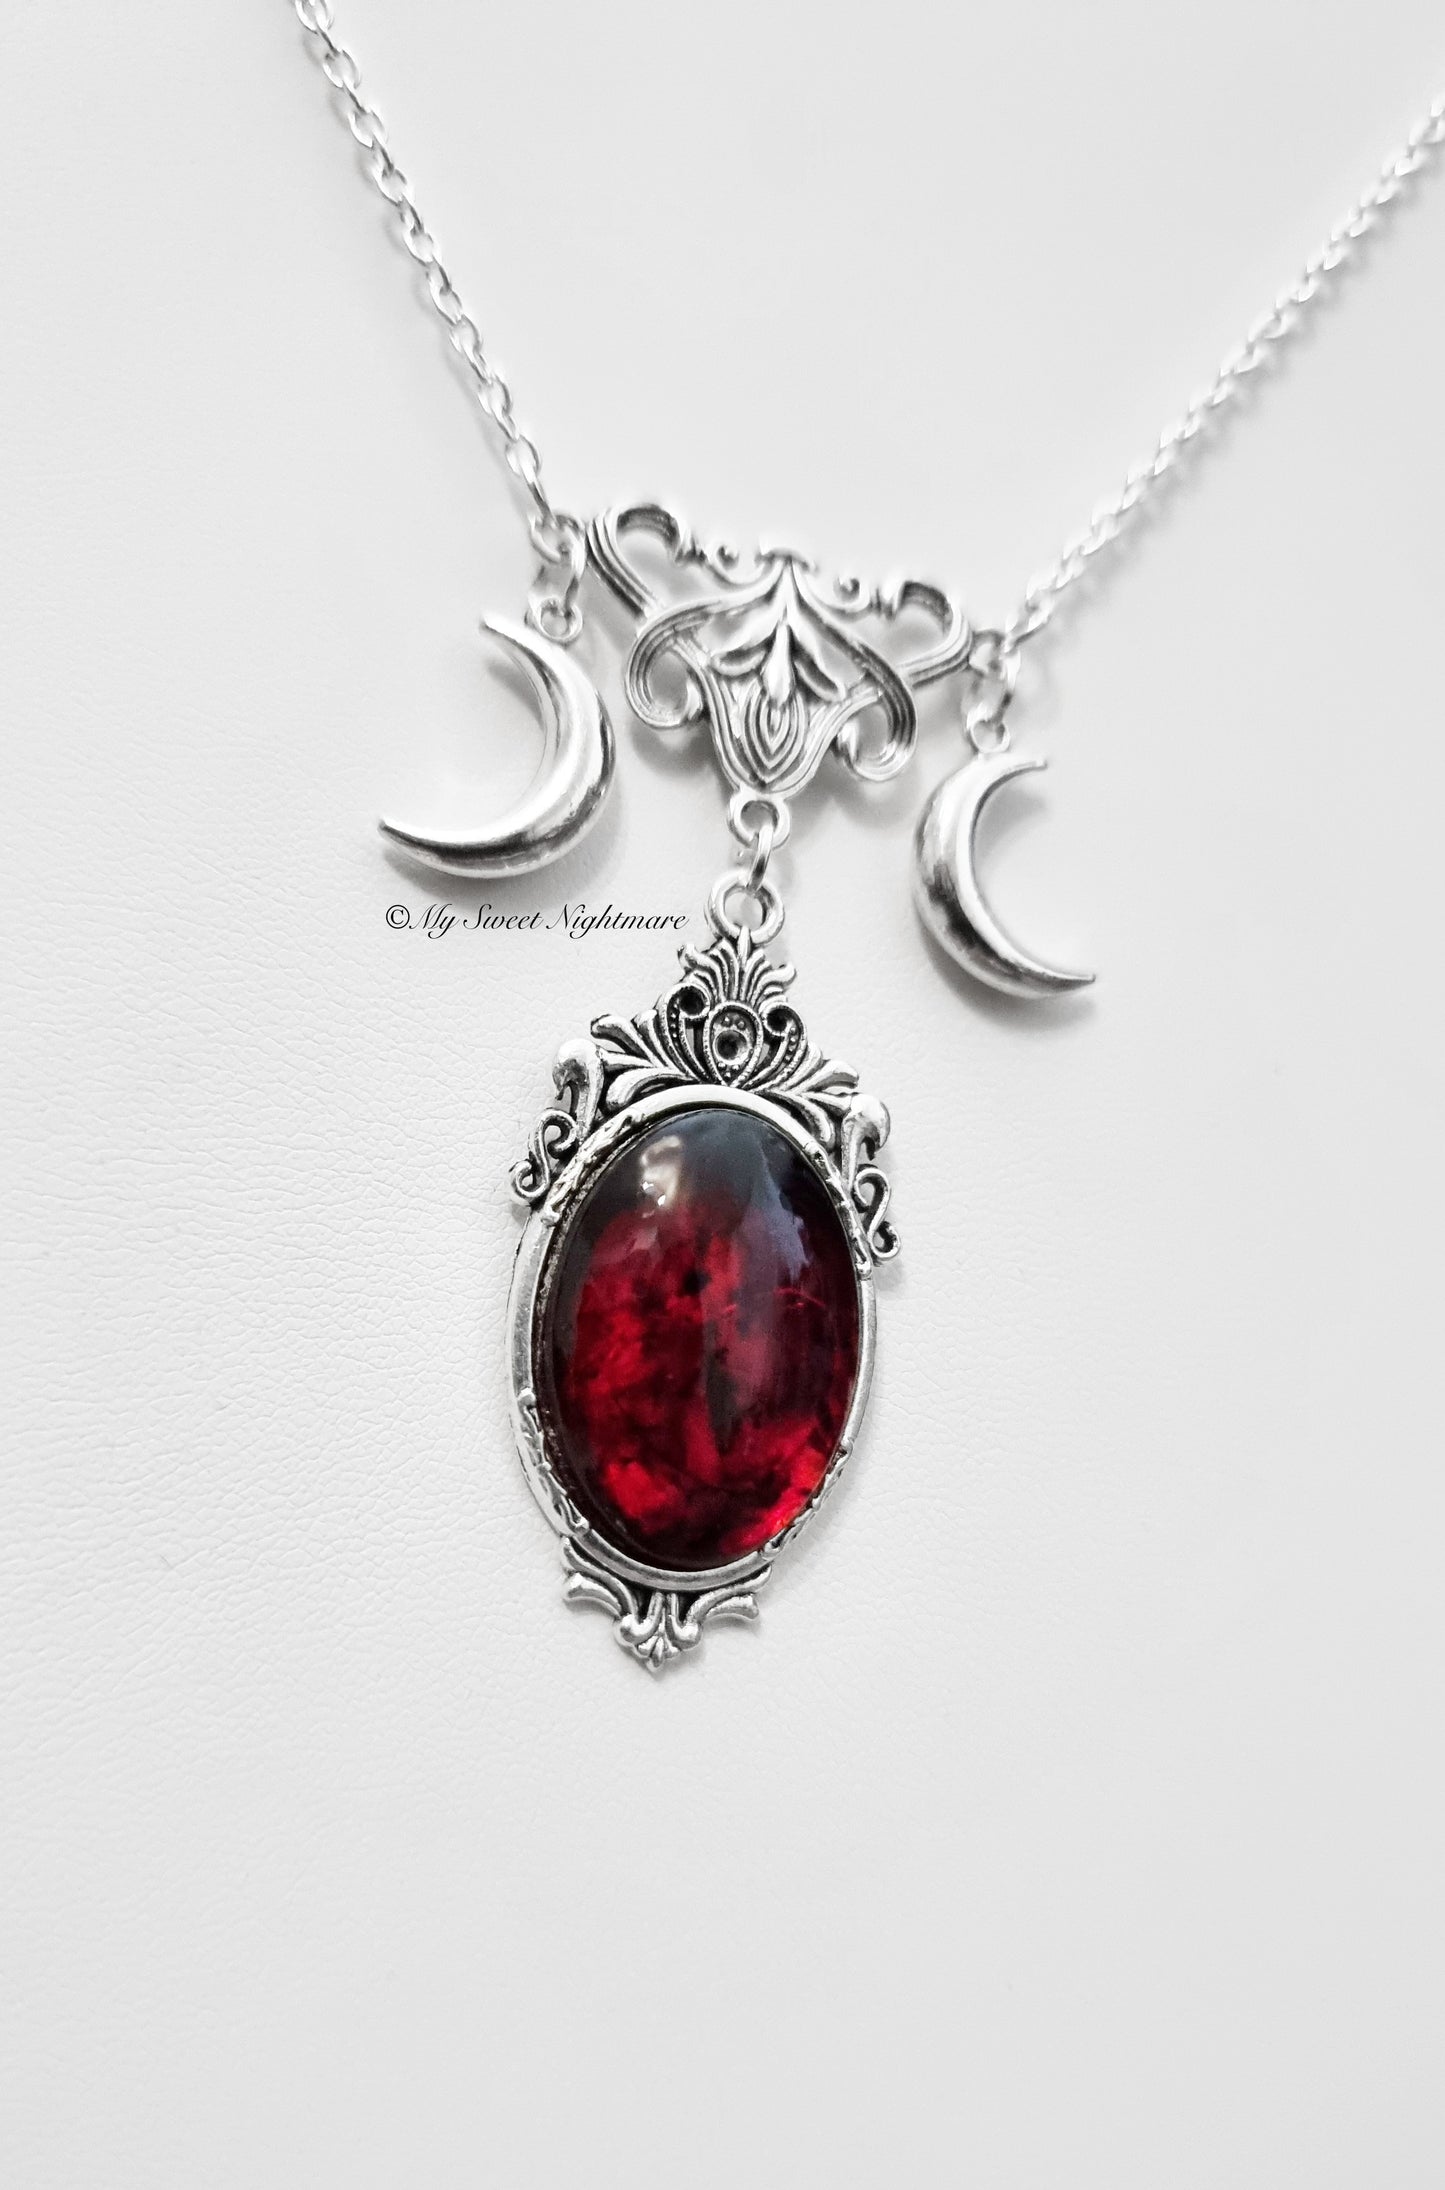 "CARMILLA" Necklace with Triple Moon with Blood effect